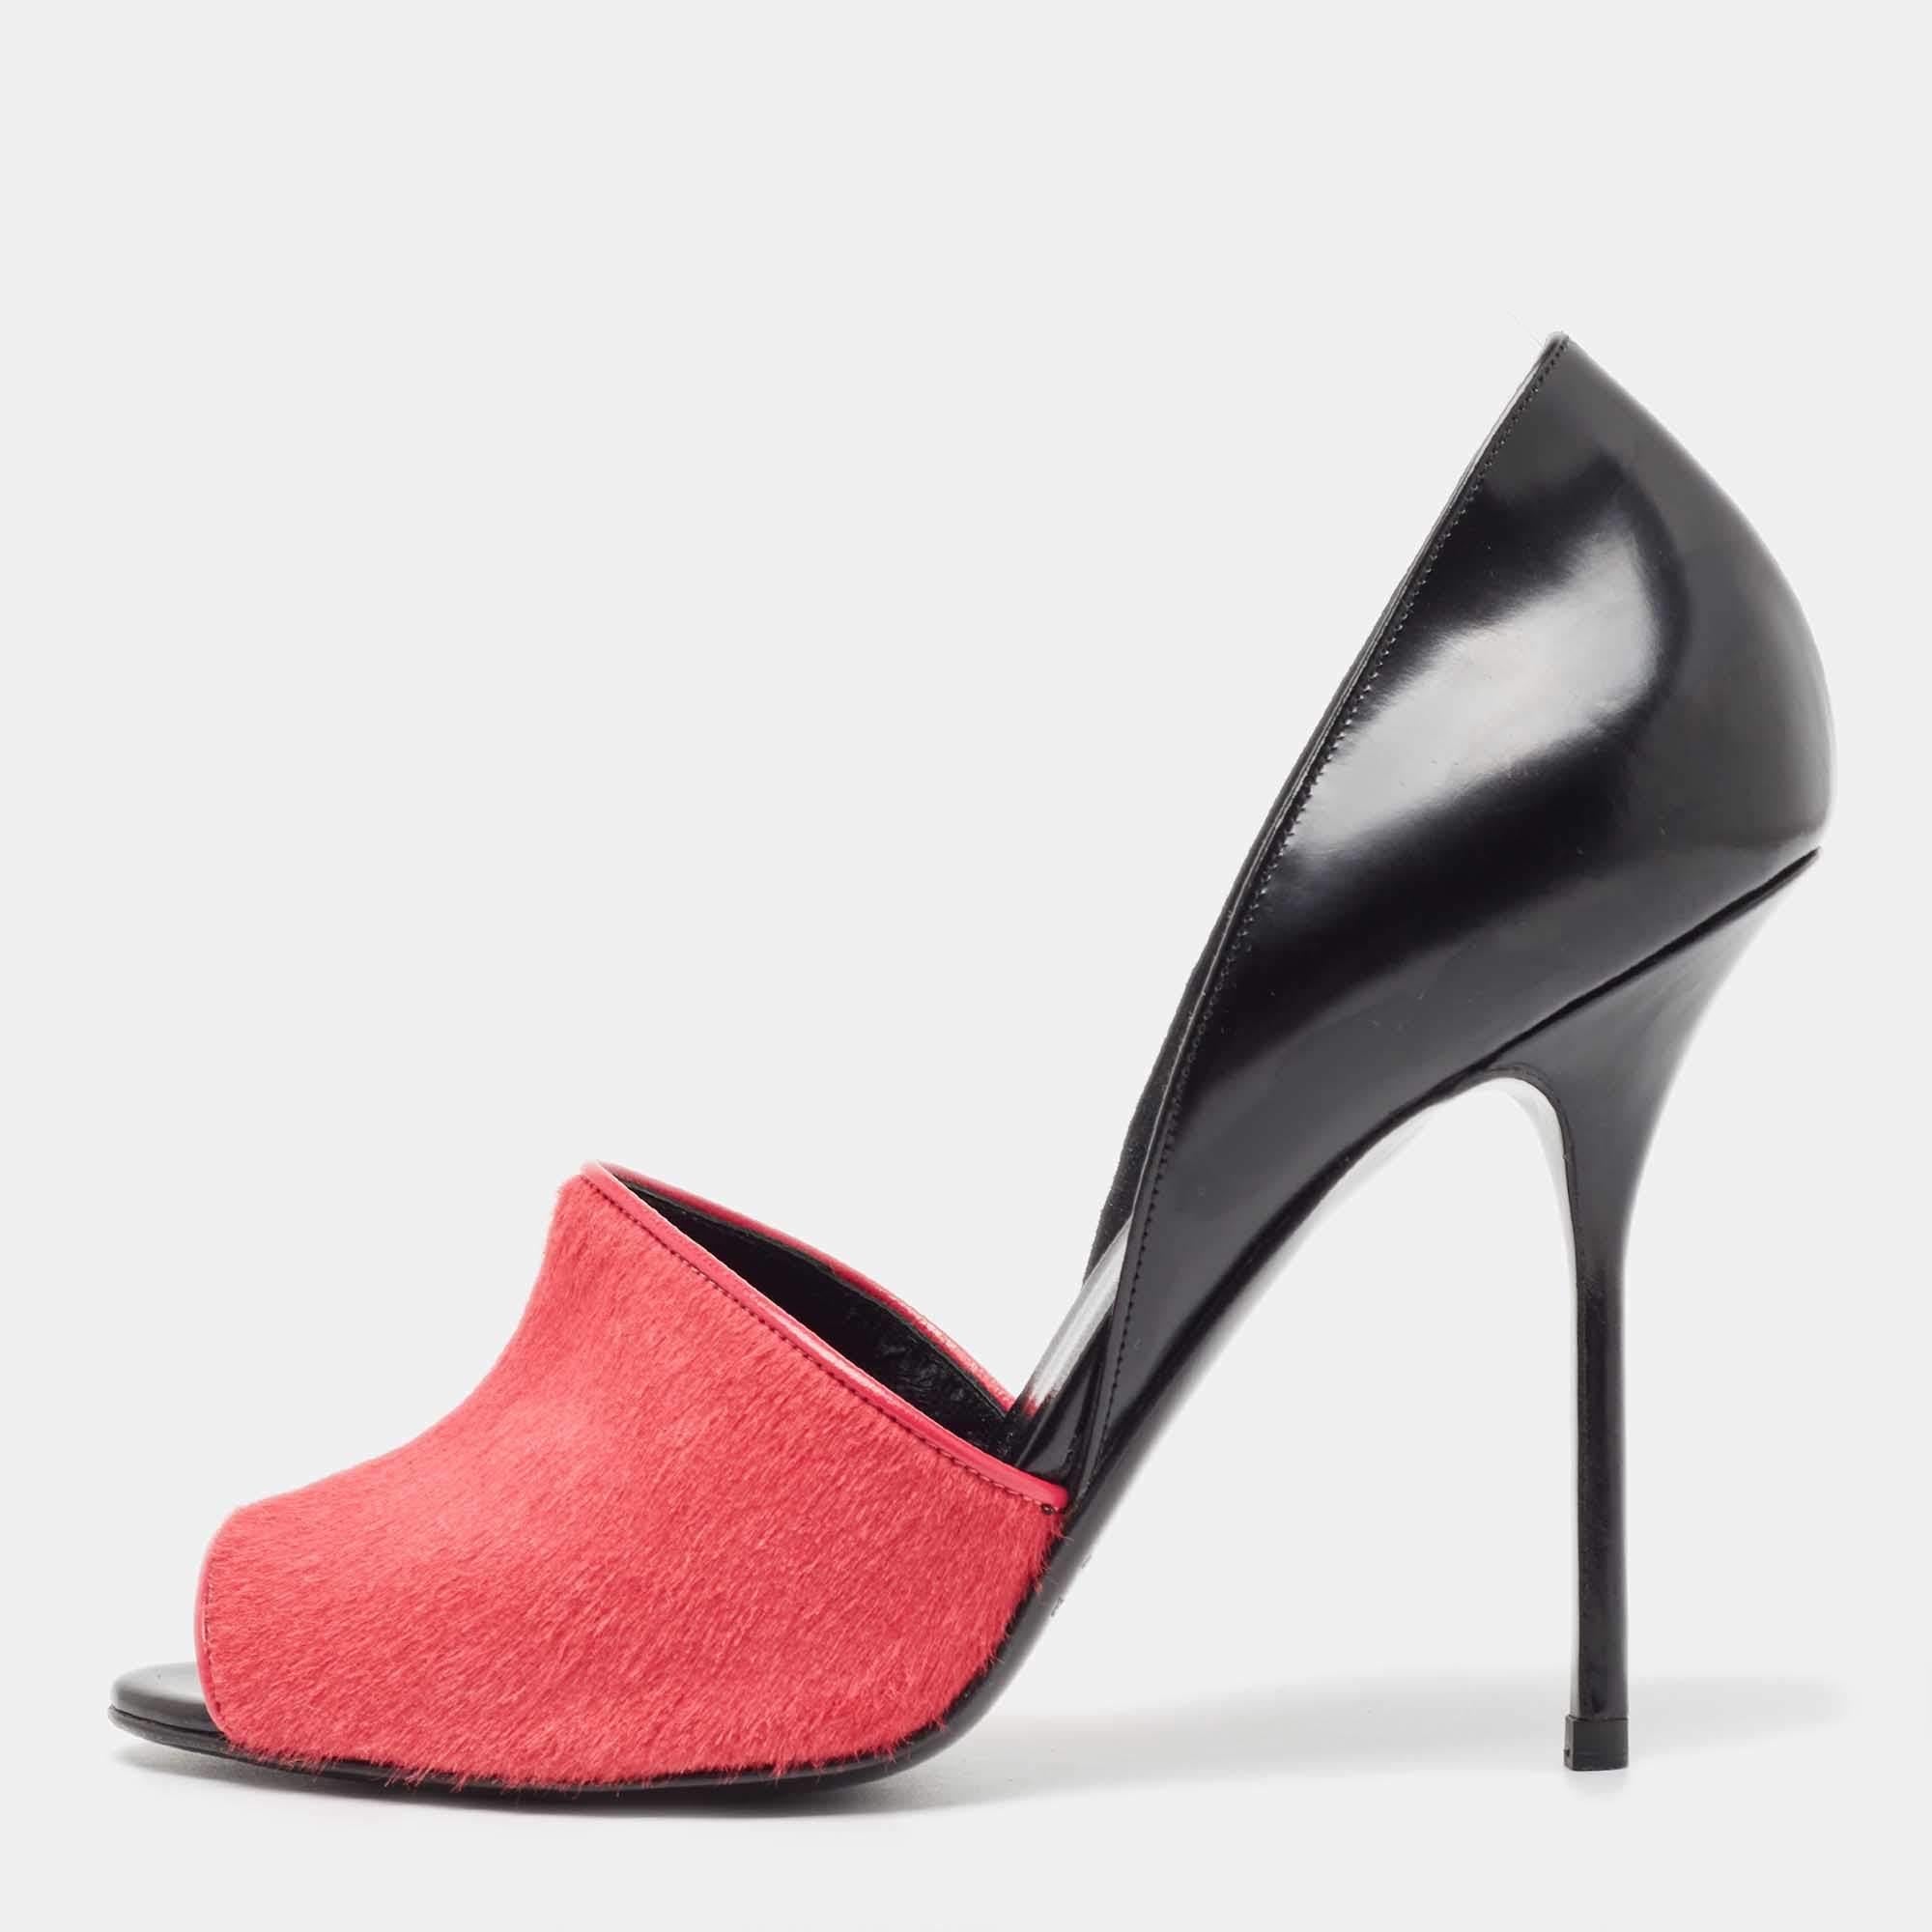 Pierre Hardy Black/Pink Calf Hair Leather and Calf Hair Open Toe Pumps Size 38 For Sale 1